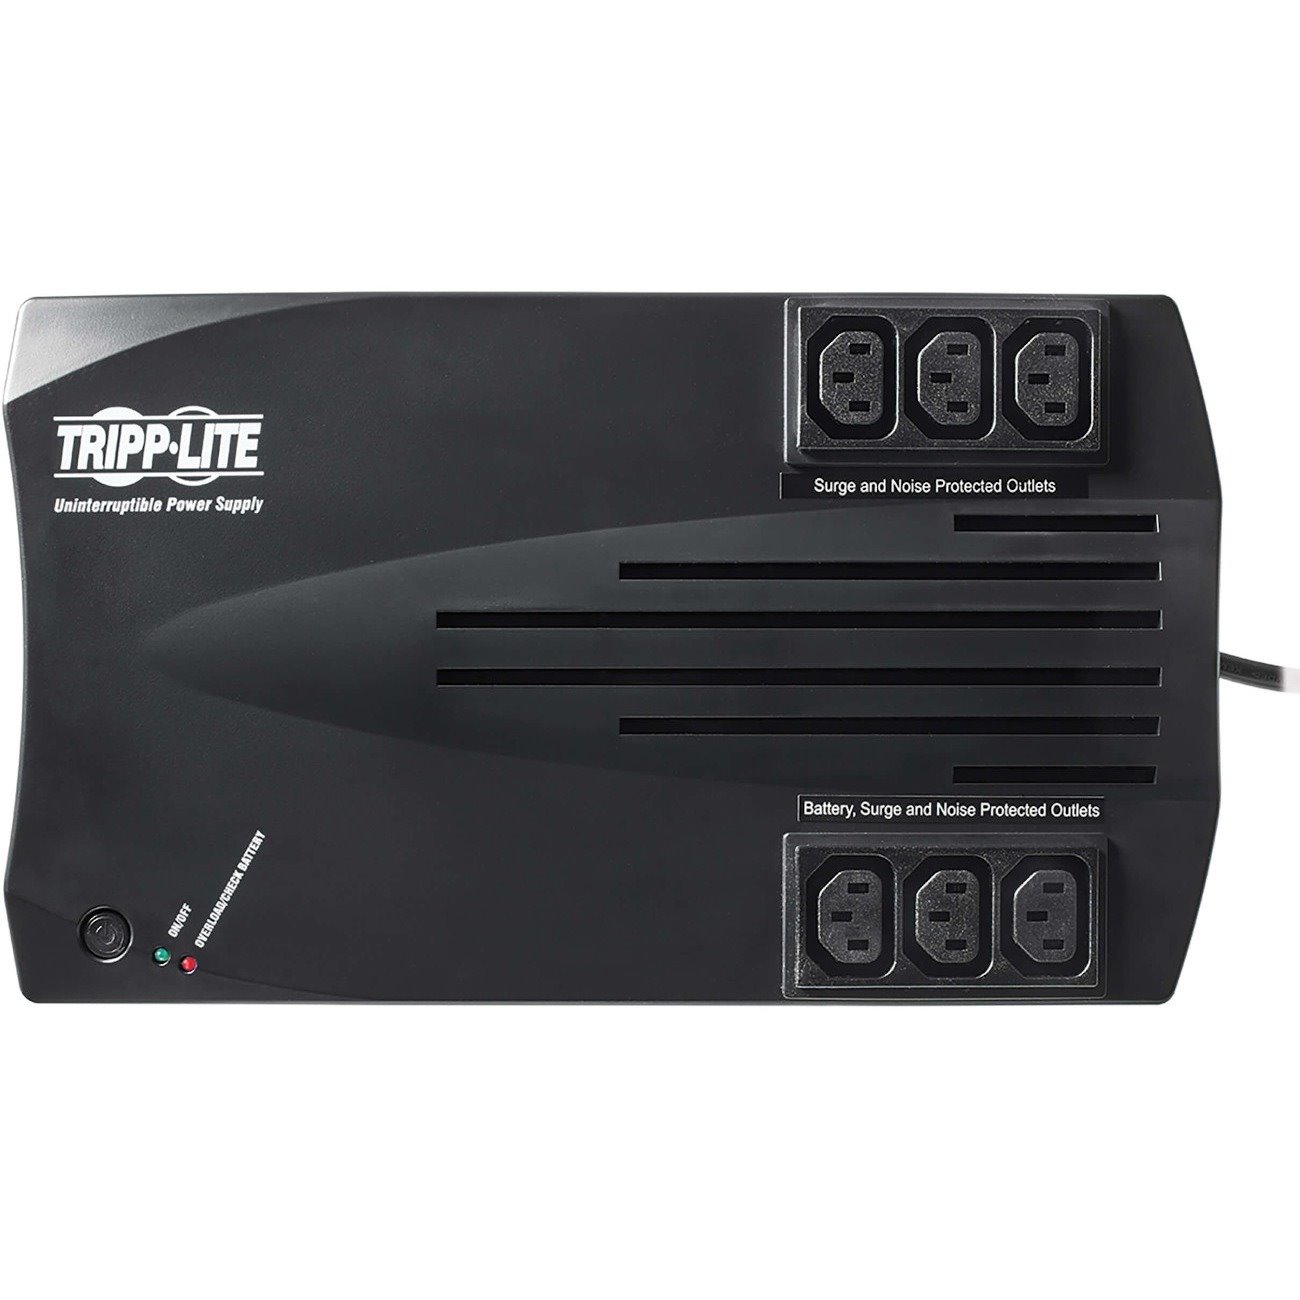 Tripp Lite by Eaton 750VA 450W 230V Ultra-Compact Line-Interactive UPS - 6 C13 Outlets, 2 AUS/NZ Adapters, Desktop/Wall-Mount